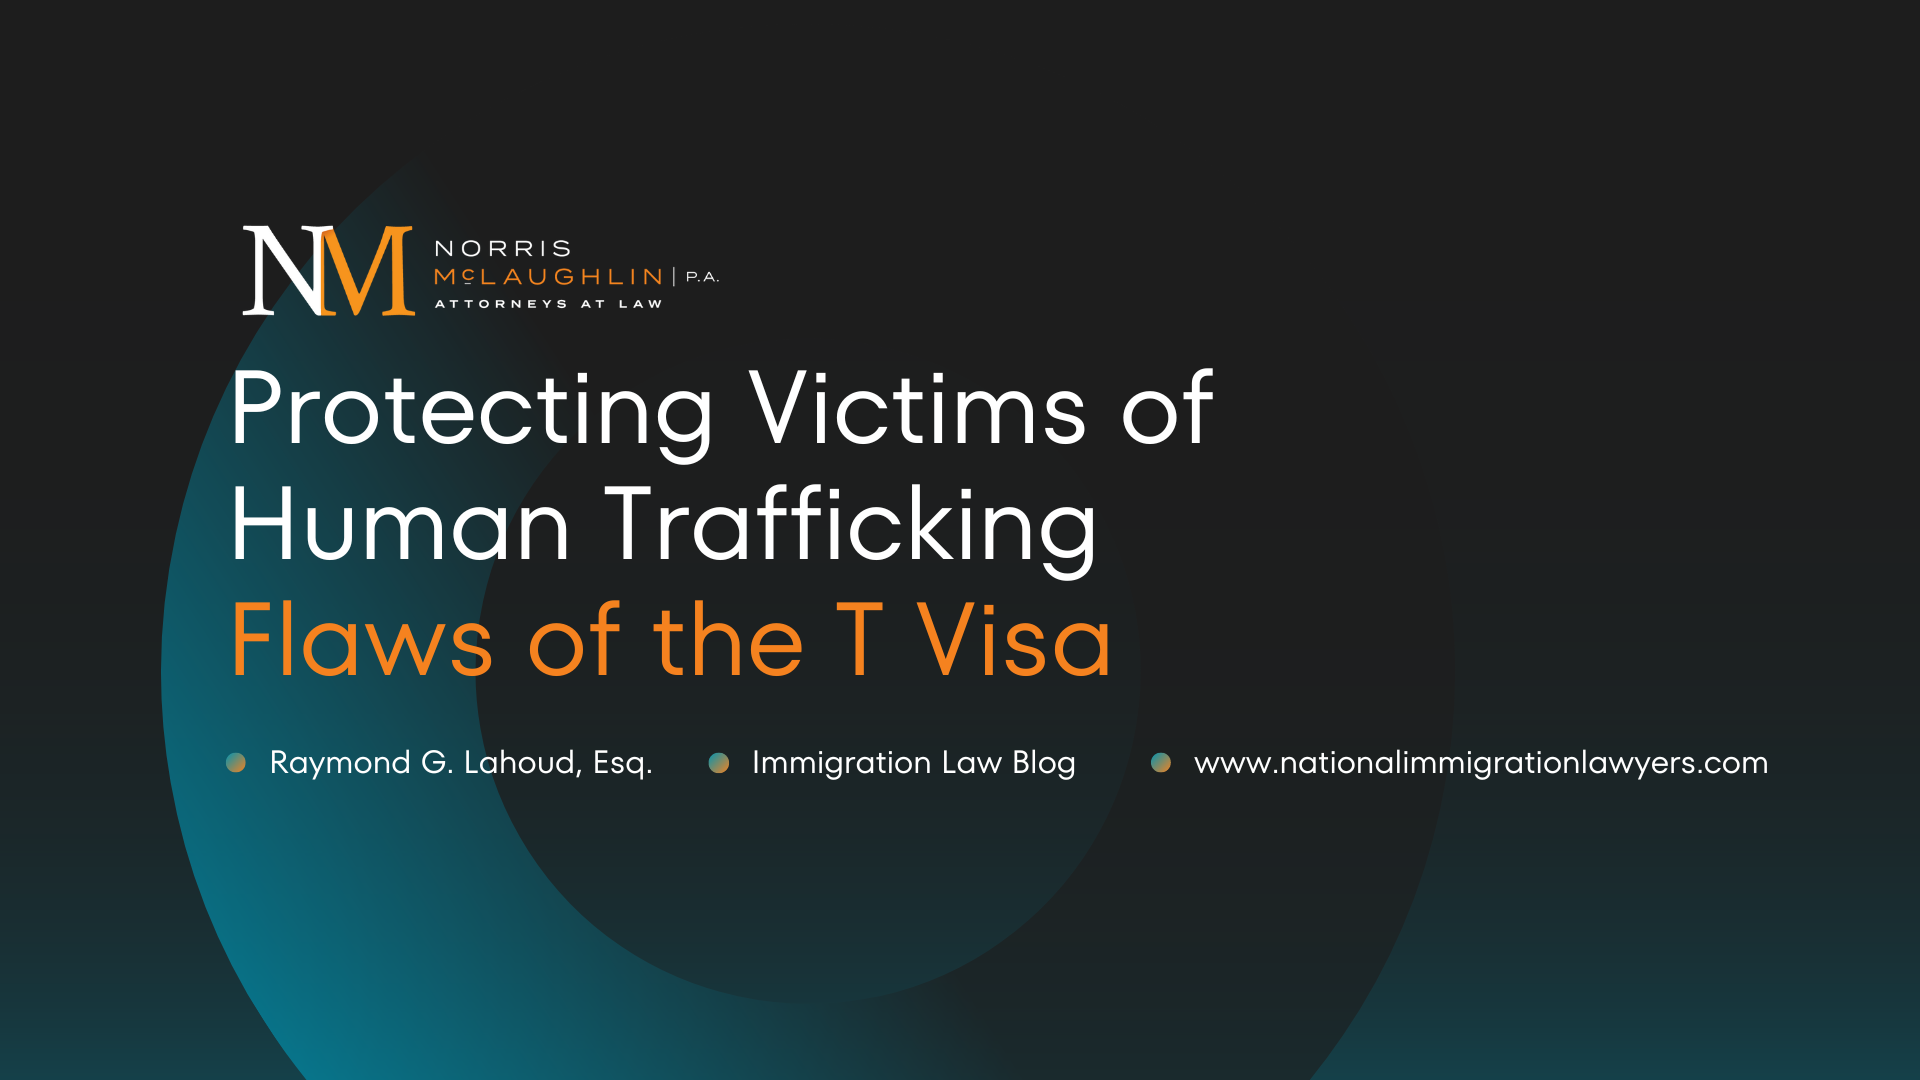 Protecting Victims of Human Trafficking: Flaws of the T Visa